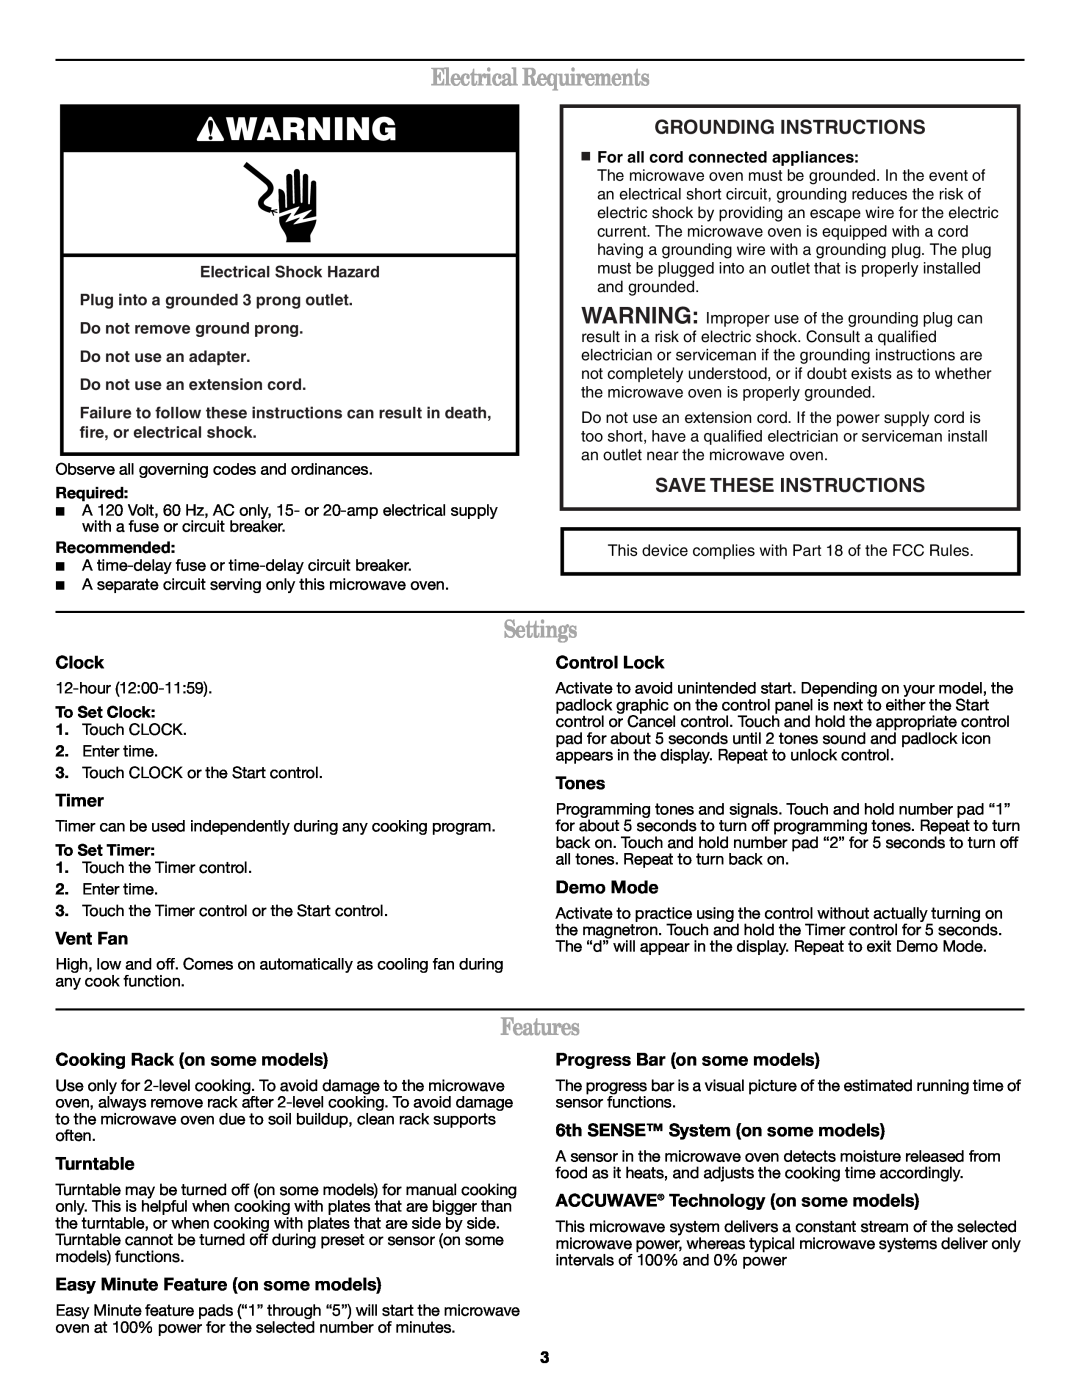 Whirlpool W10131970A Electrical Requirements, Settings, Features, Grounding Instructions, Save These Instructions 